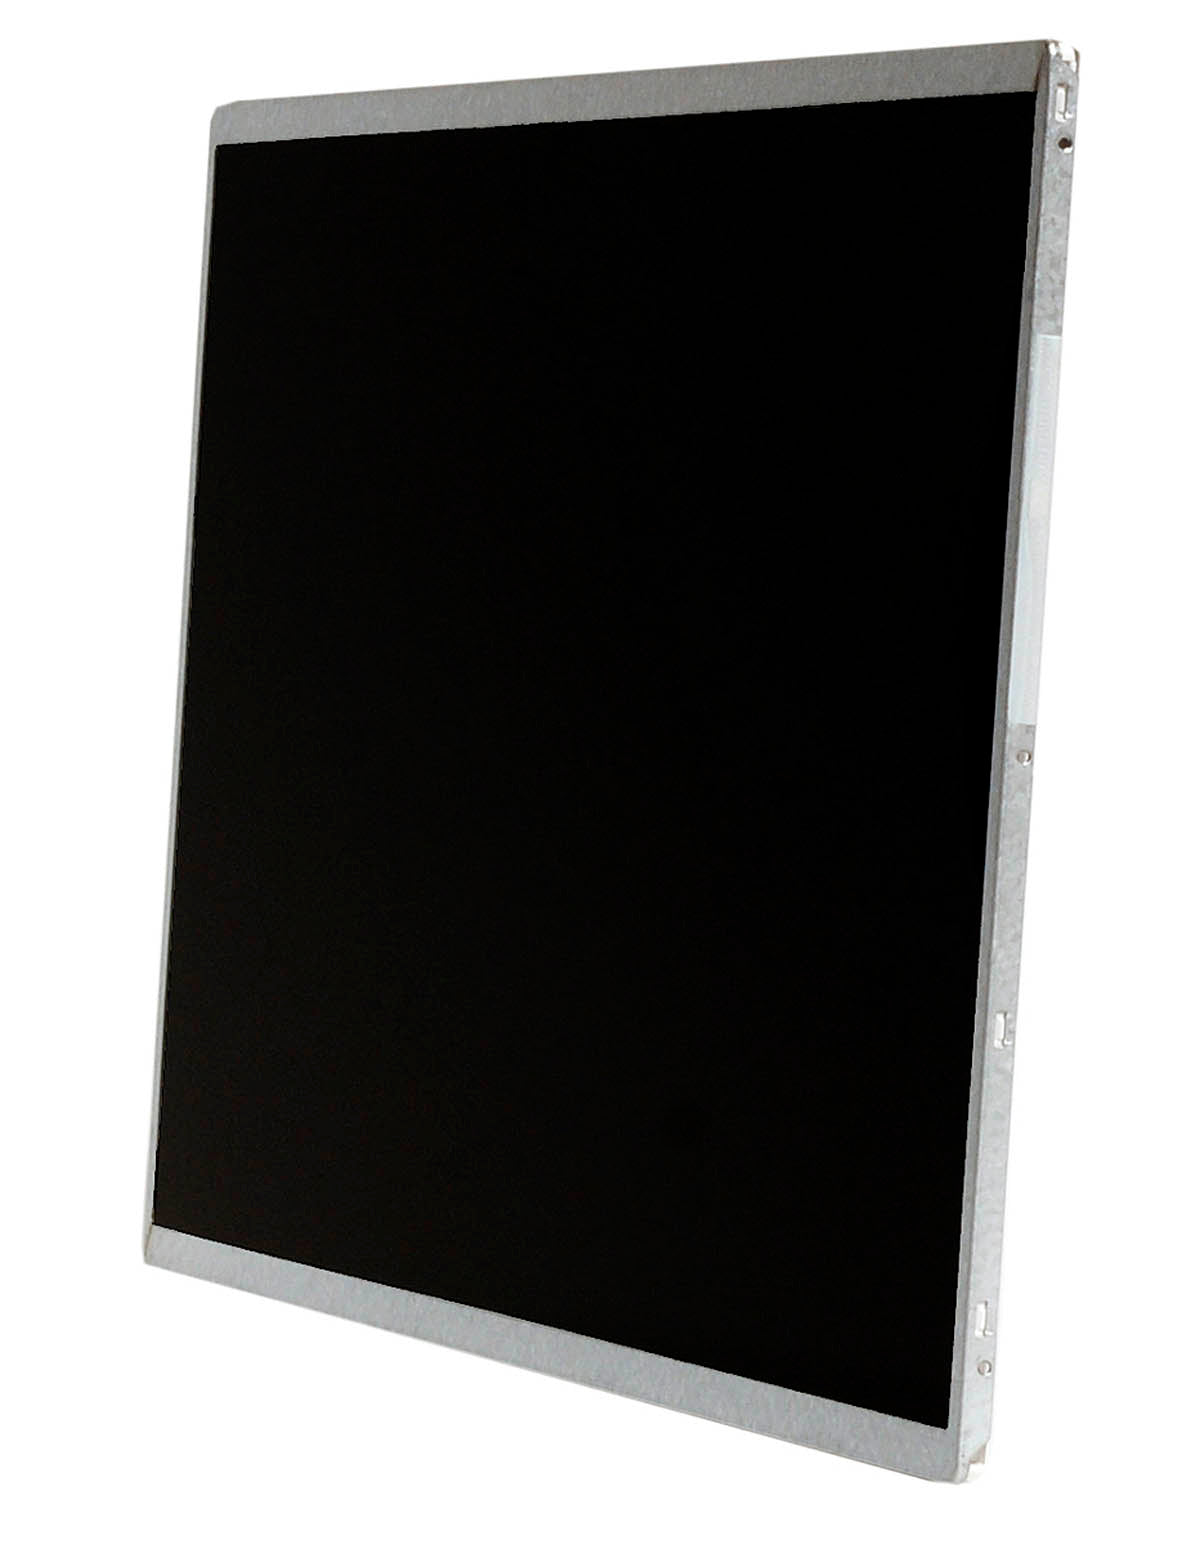 Replacement Screen For LTN140AT22-L01 HD 1366x768 Glossy LCD LED Display